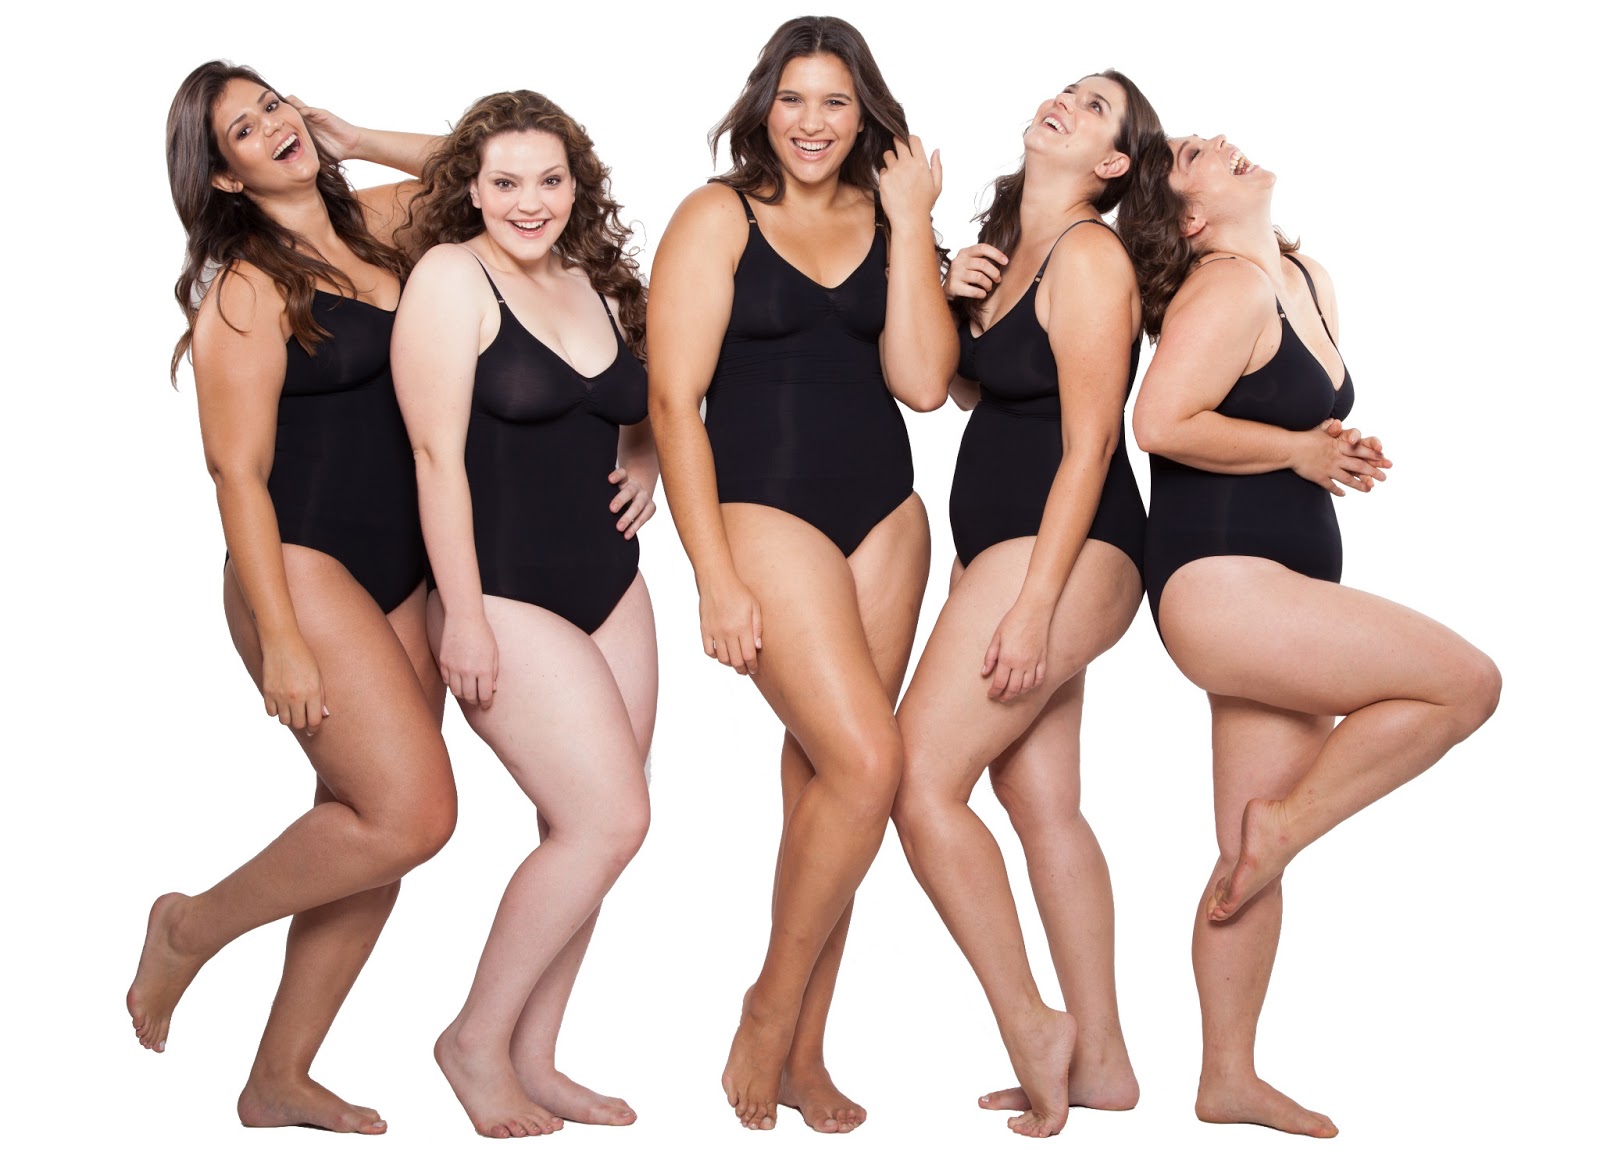 Modeling plus size has greater positive impact in society